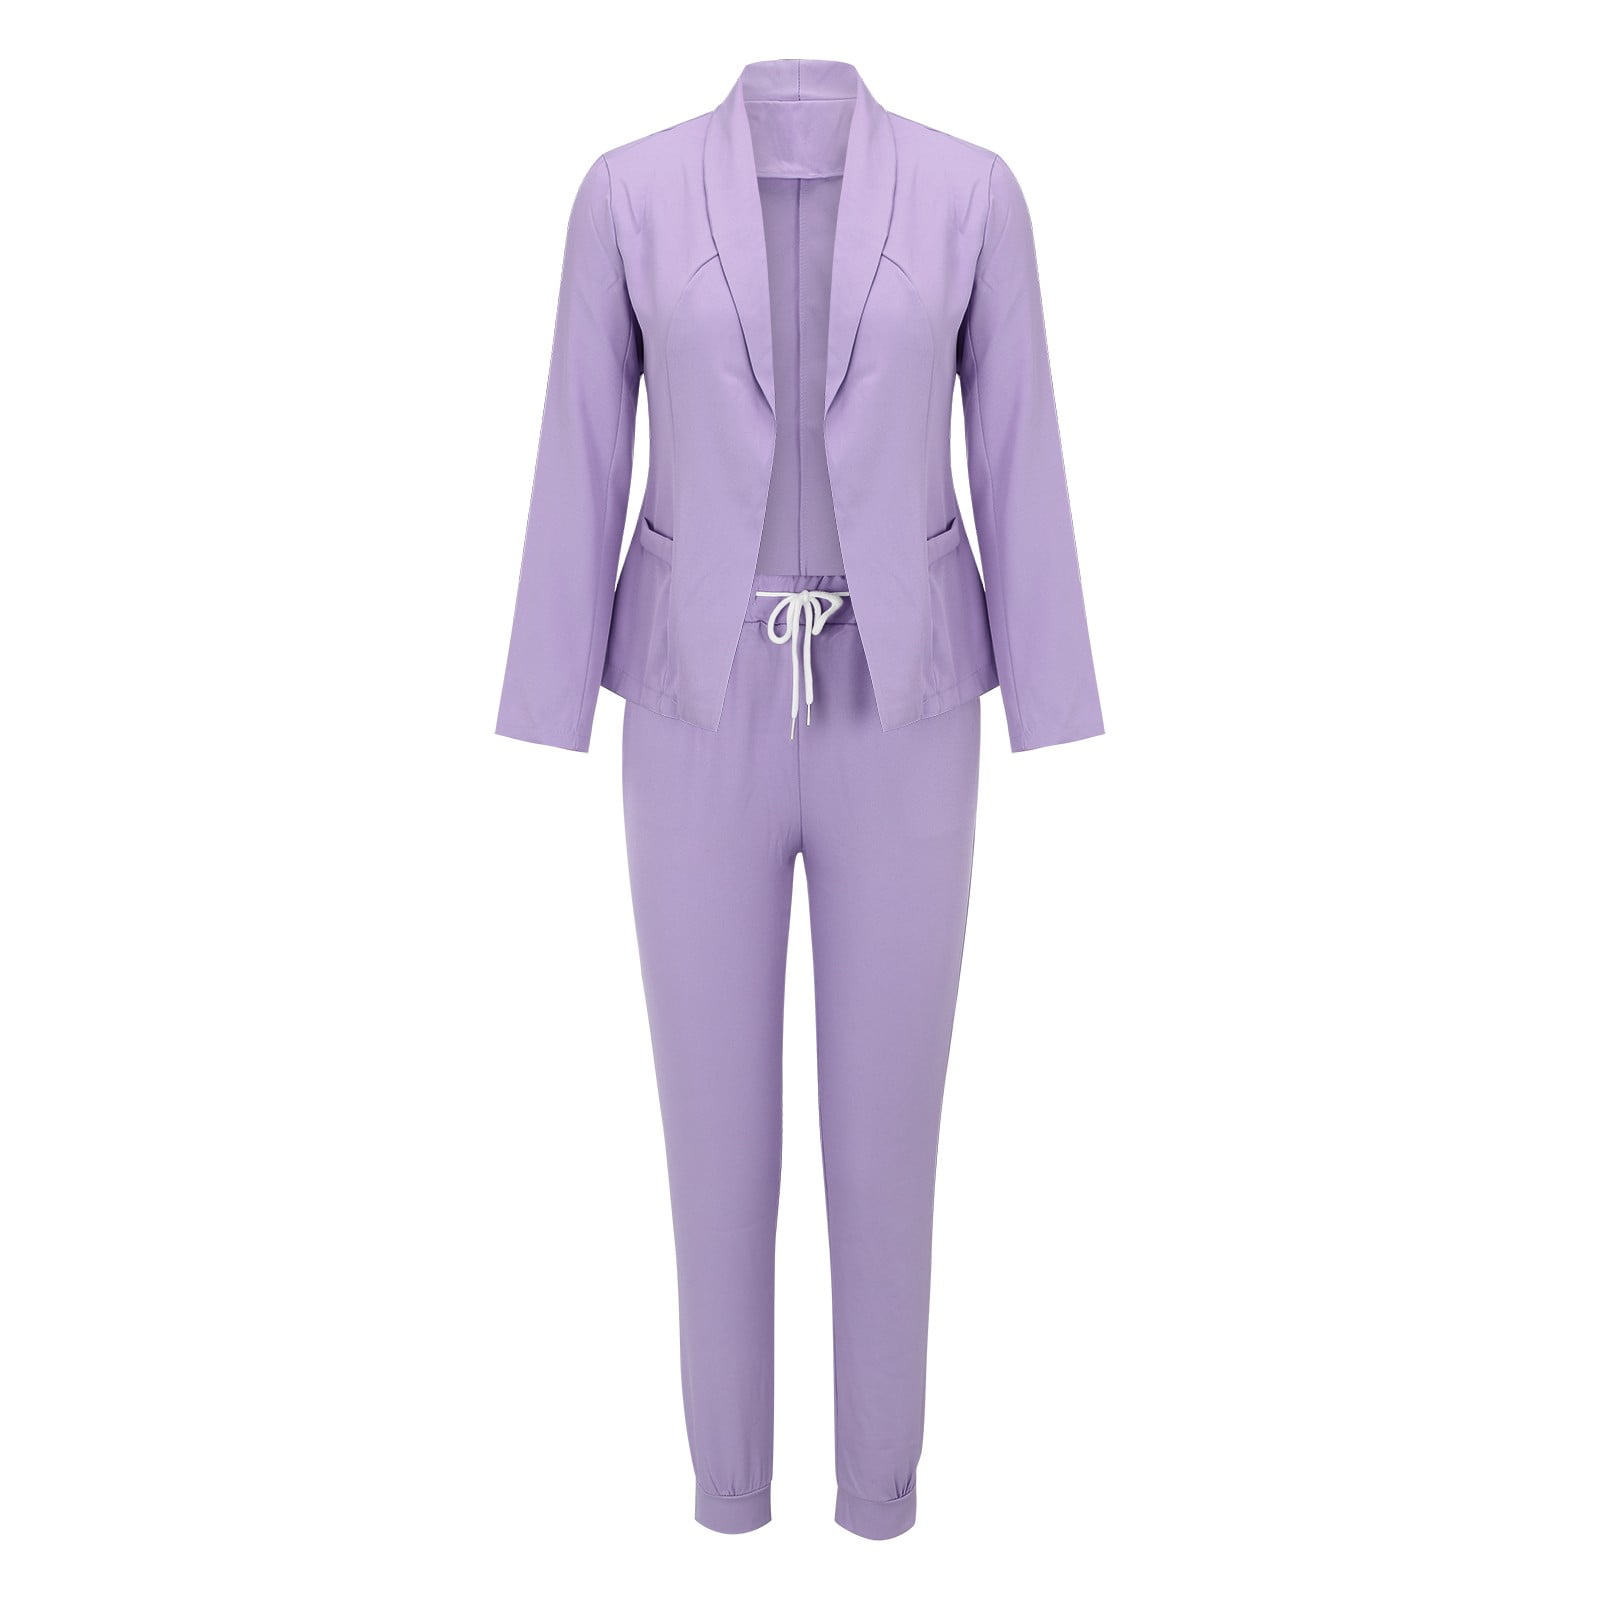  Lolmot Your Orders Satin Blazer for Women Track Suit for Women  Two Piece Outfits for Women Plus Size Pajamas Two Piece Casual Sets for Women  Women's : Sports & Outdoors